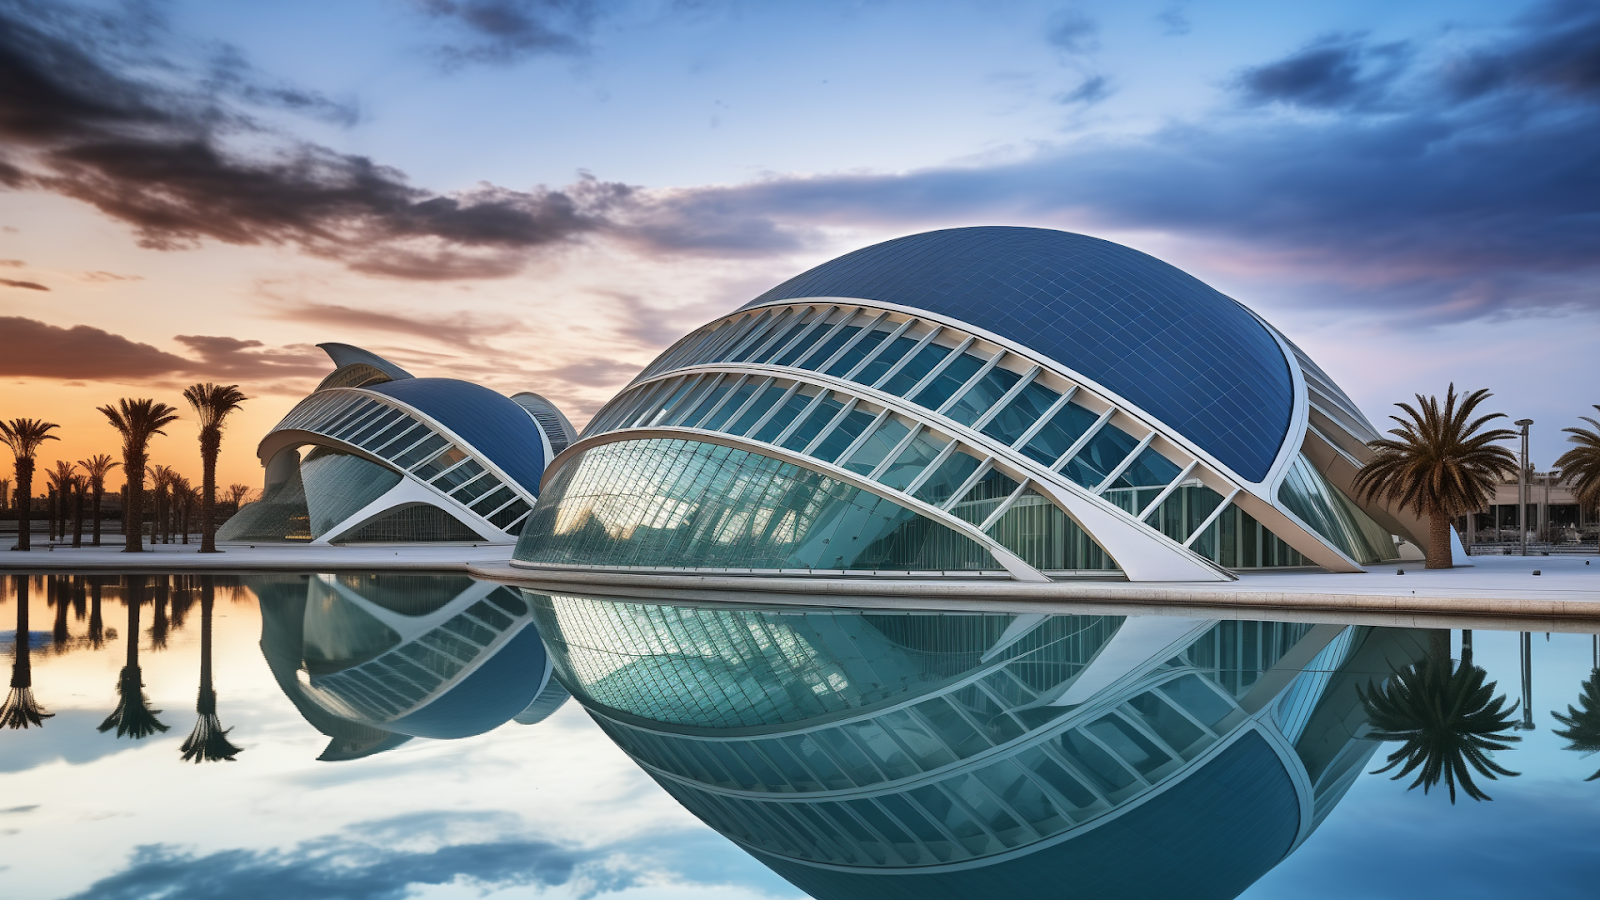 Twilight over the City of Arts and Sciences in Valencia, showcasing the stunning reflection of its avant-garde buildings.